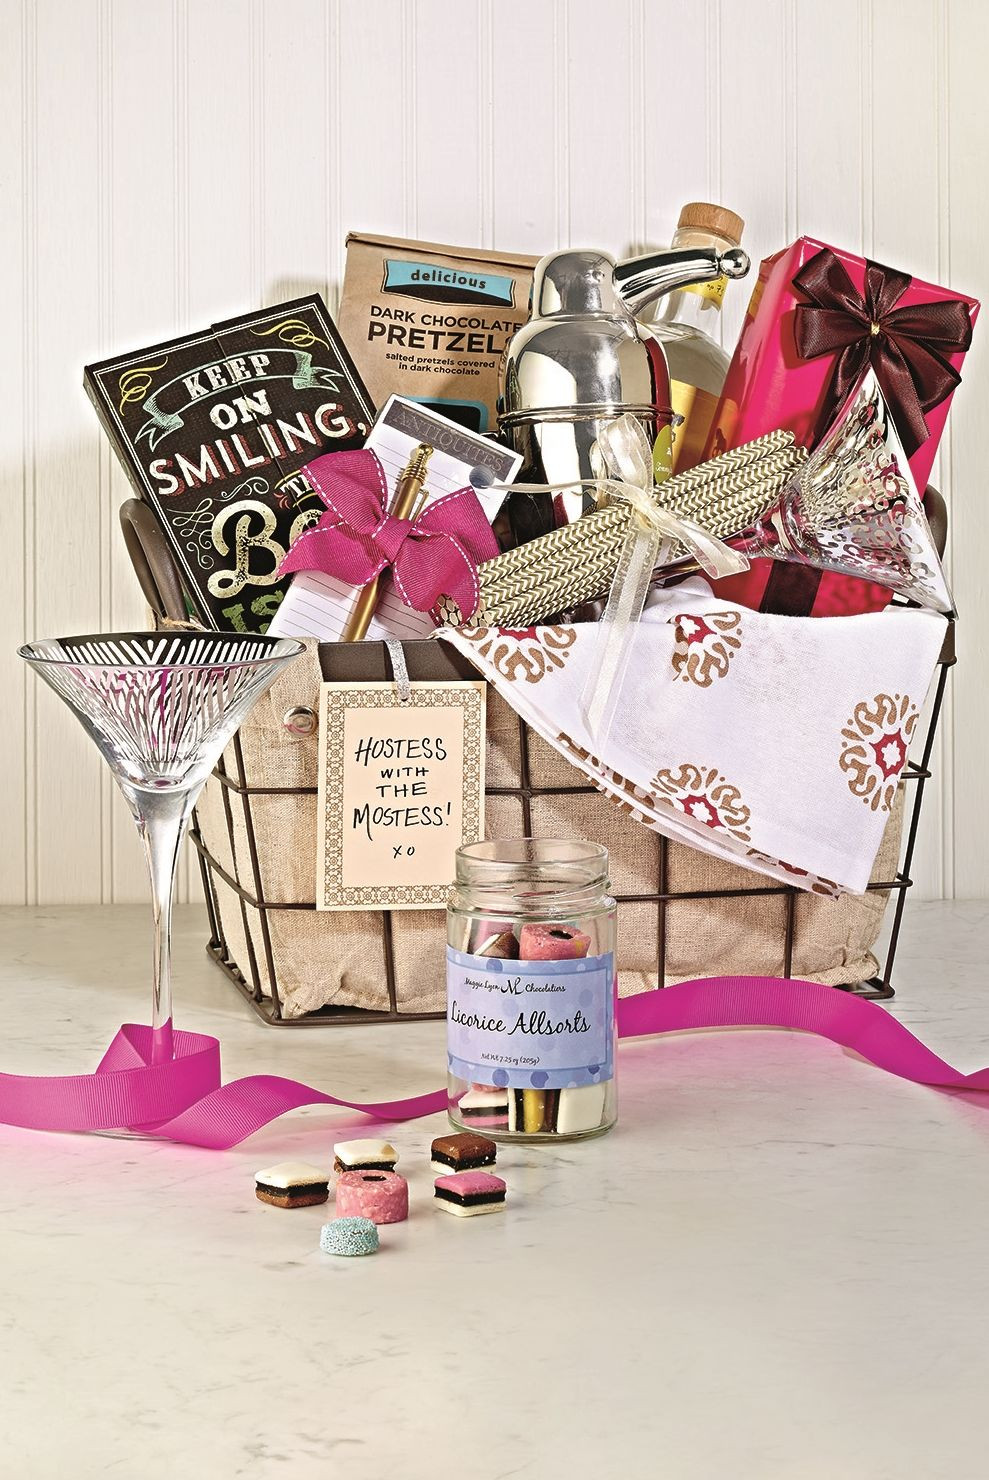 DIY Gift Baskets For Her
 DIY t basket for the hostess Give her a girls night in